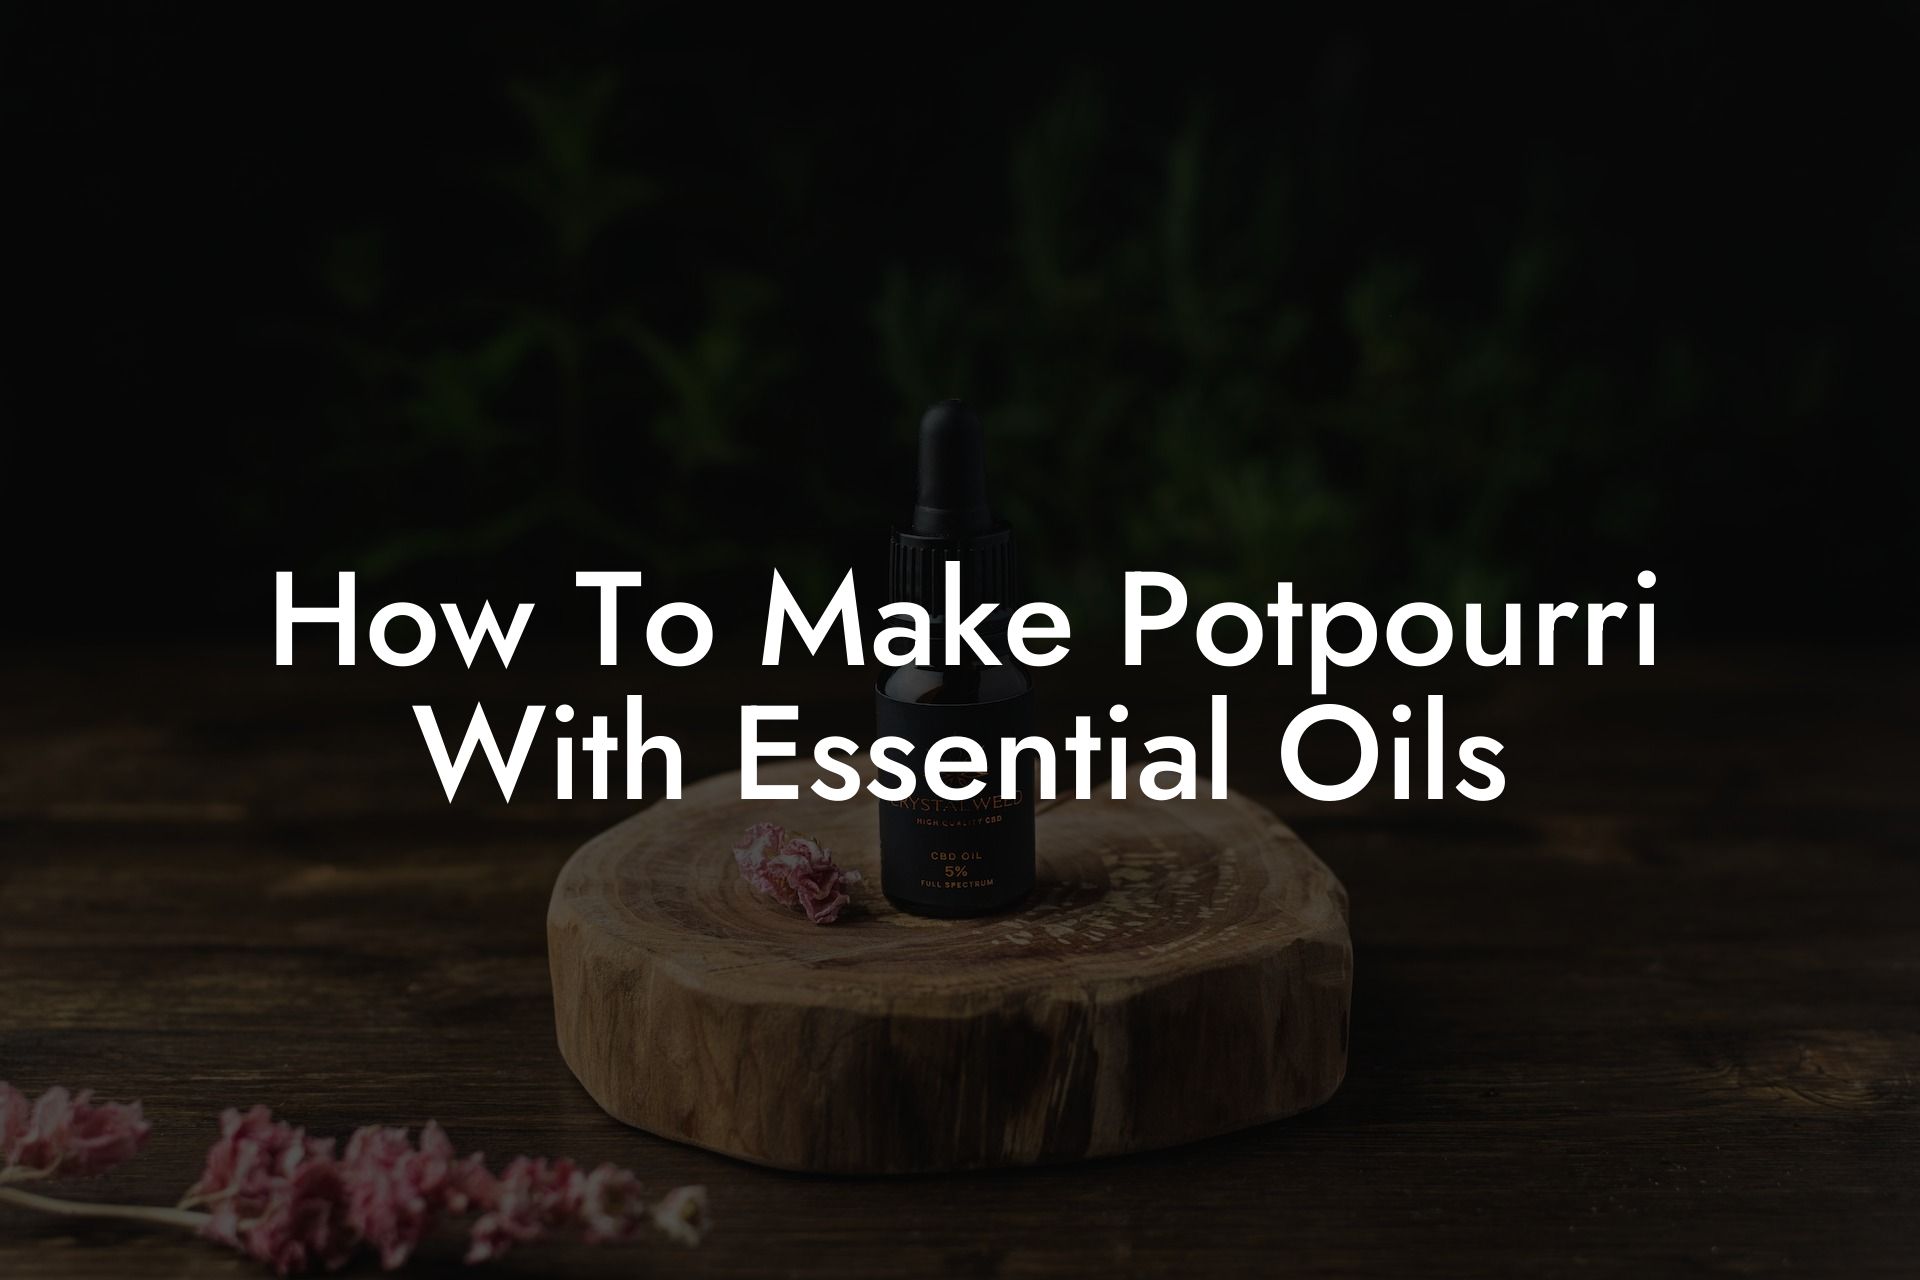 How To Make Potpourri With Essential Oils